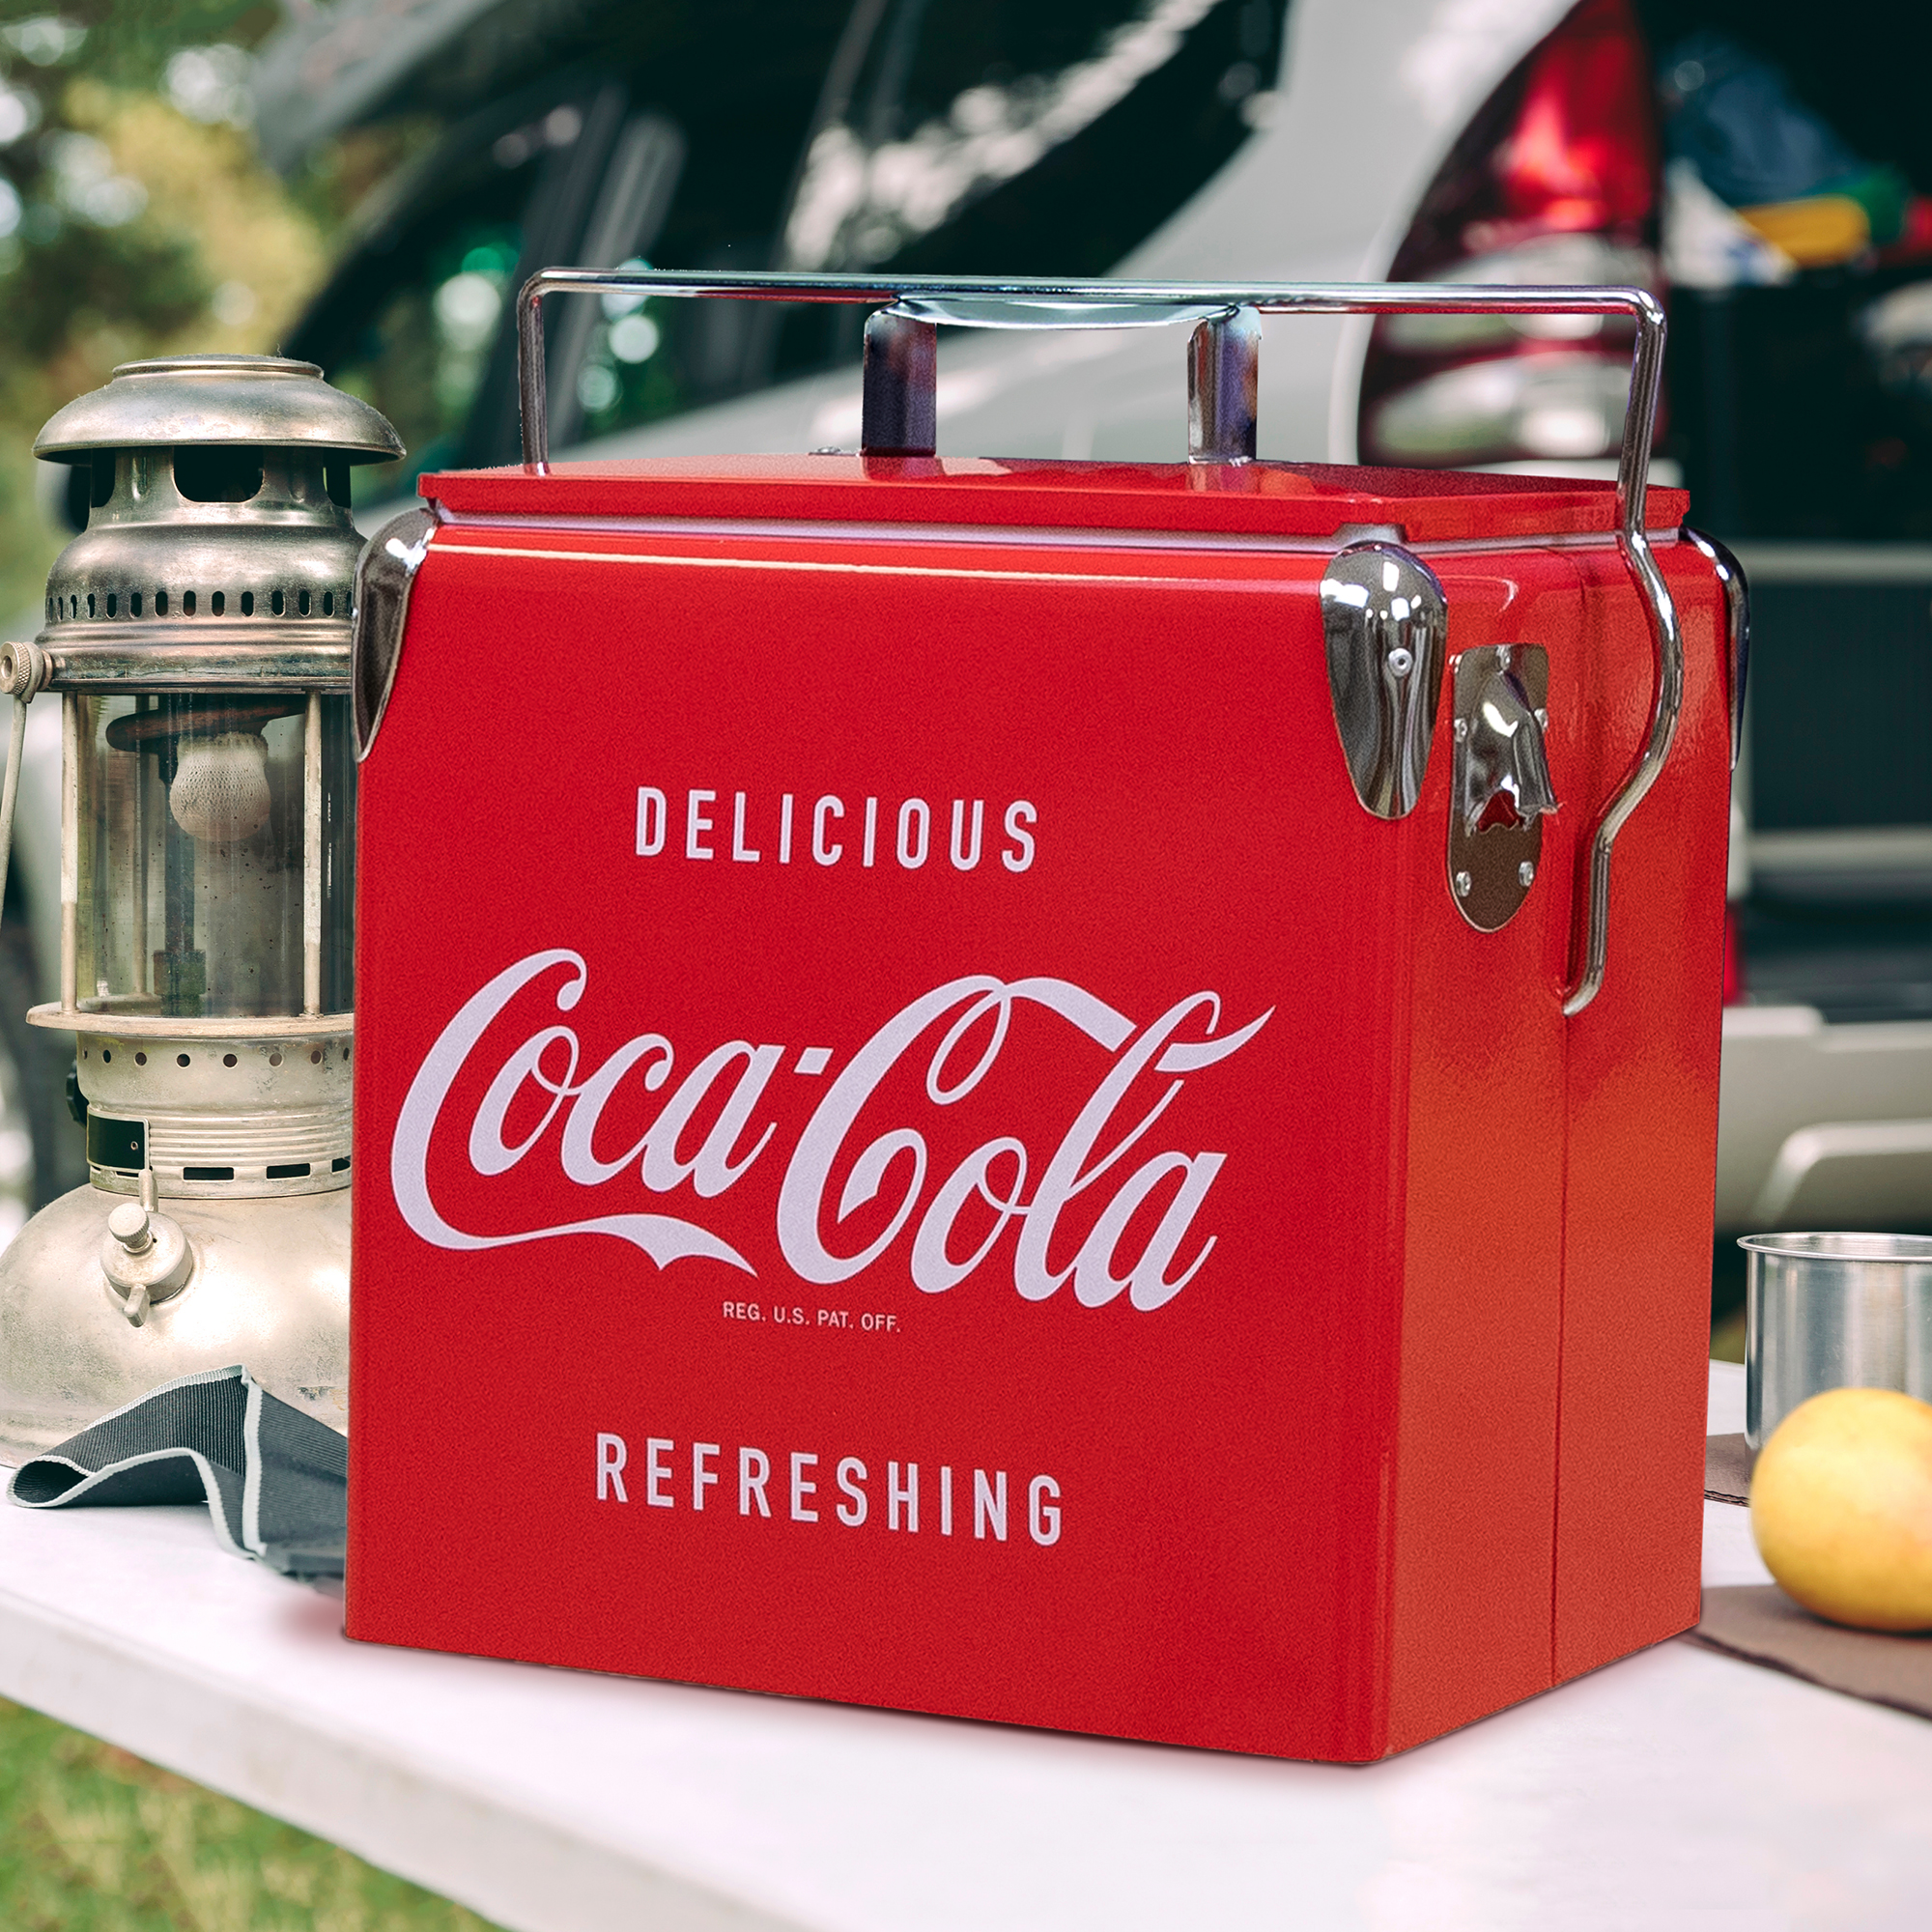 Coca-Cola Retro Portable Ice Chest Cooler with Bottle Opener 13L (14 qt), 18 Can Capacity, Red Vintage Style Ice Bucket for Camping, Beach, Picnic, RV, BBQs, Tailgating, Fishing - image 5 of 7